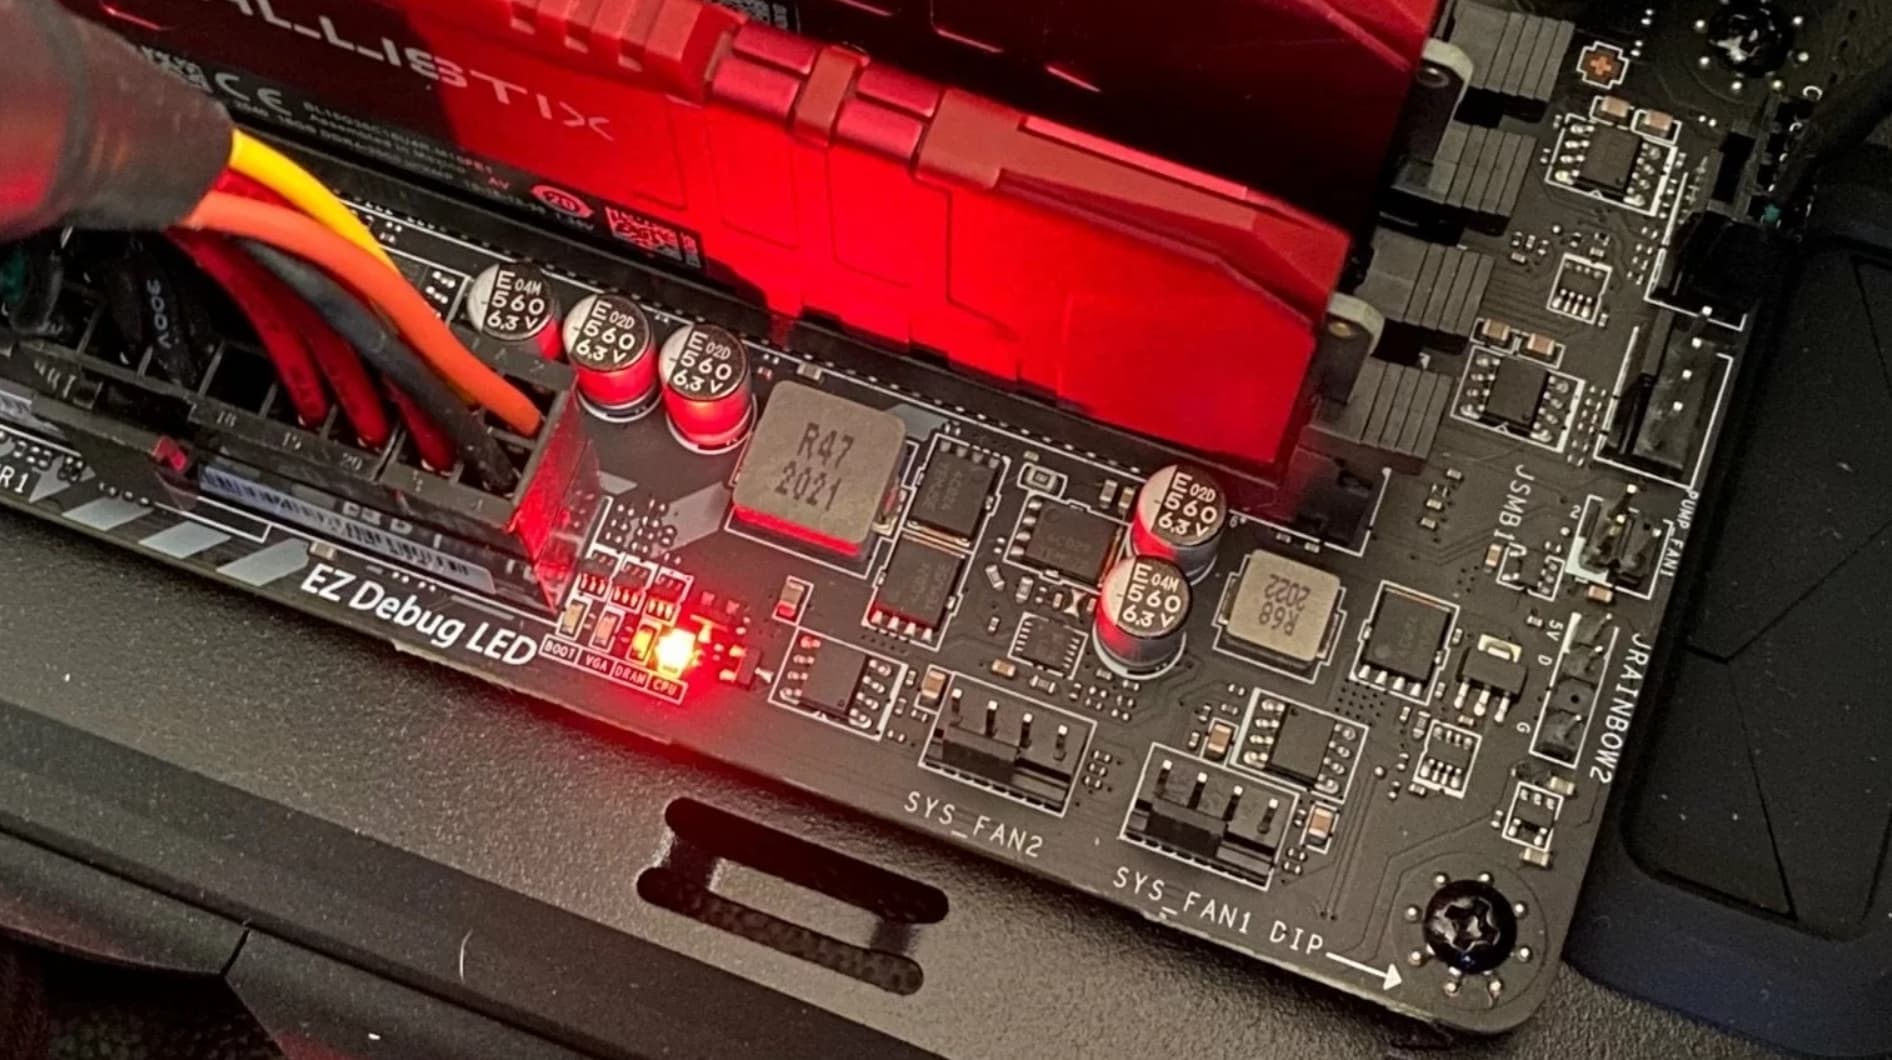 Why Do PC Case Fans Flash Red When Overheating